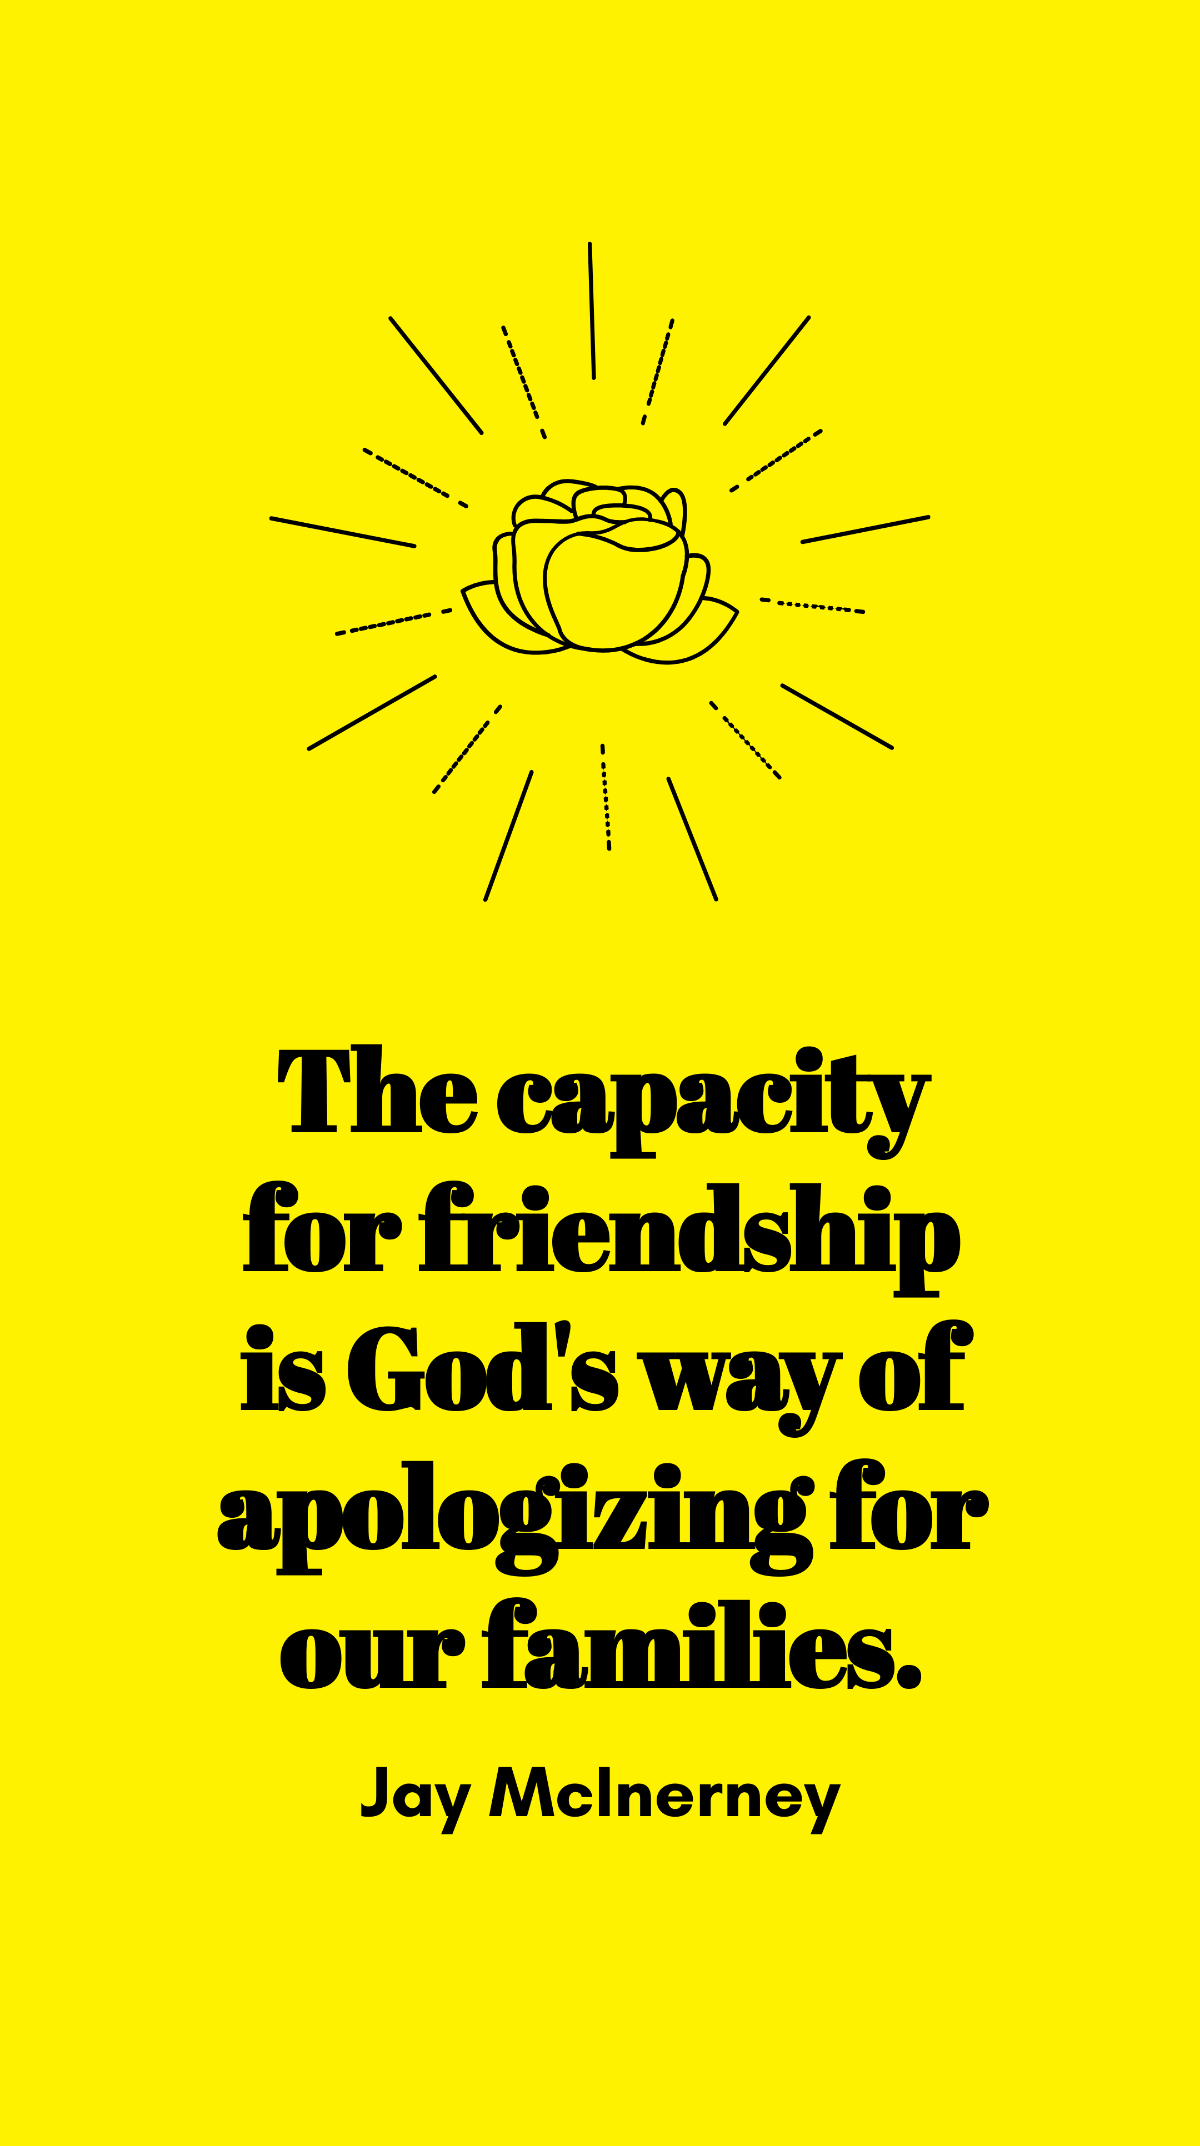 Jay McInerney - The capacity for friendship is God's way of apologizing for our families. Template